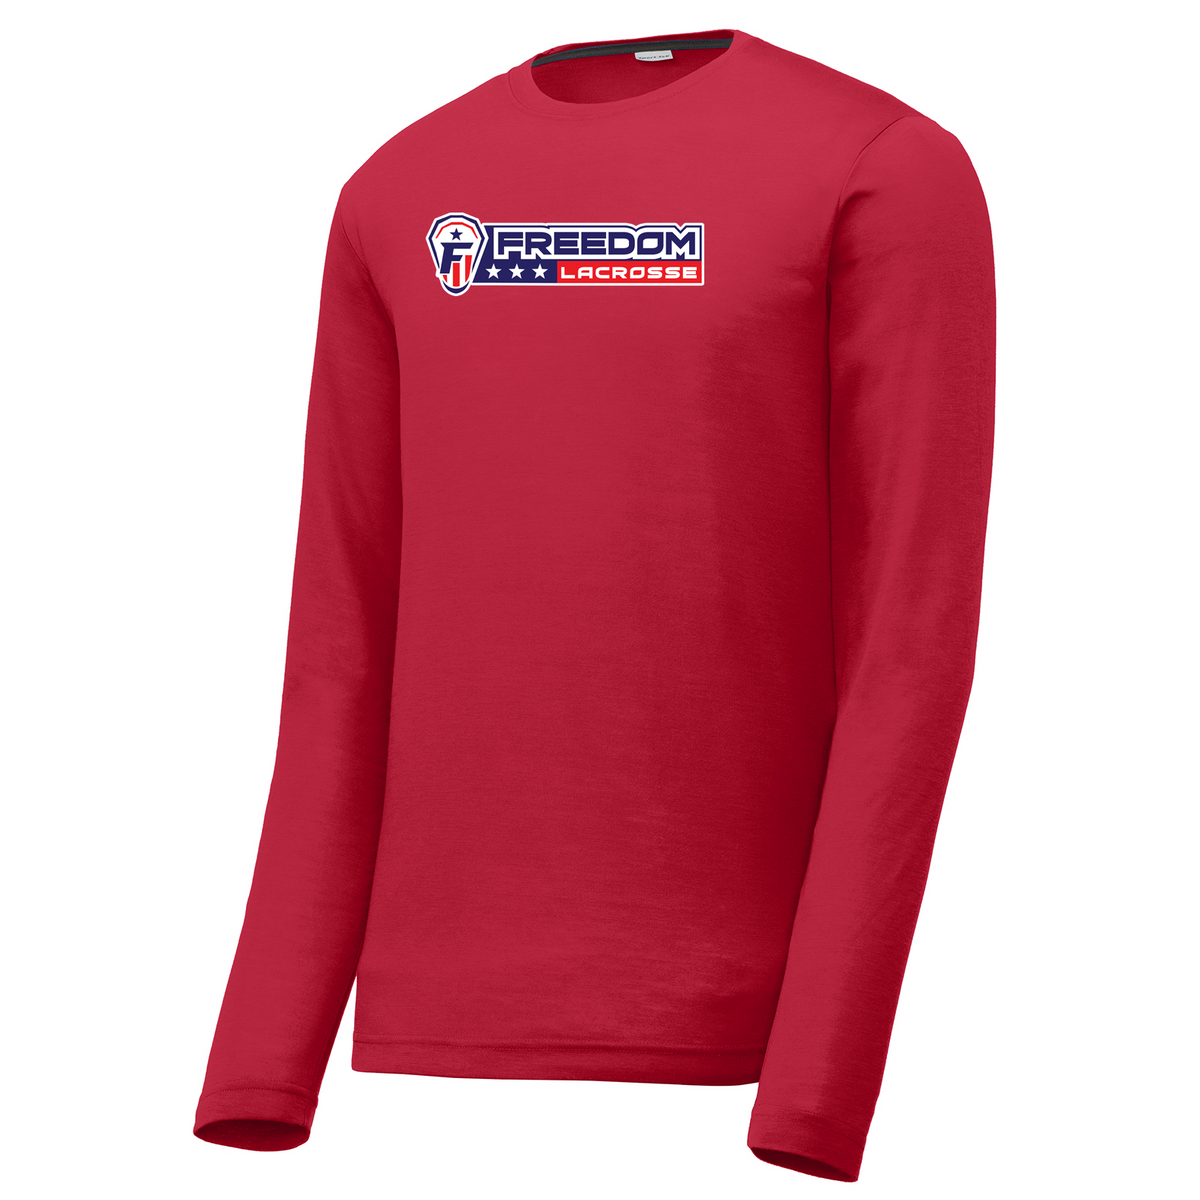 Freedom Lacrosse Red Long Sleeve CottonTouch Performance Shirt